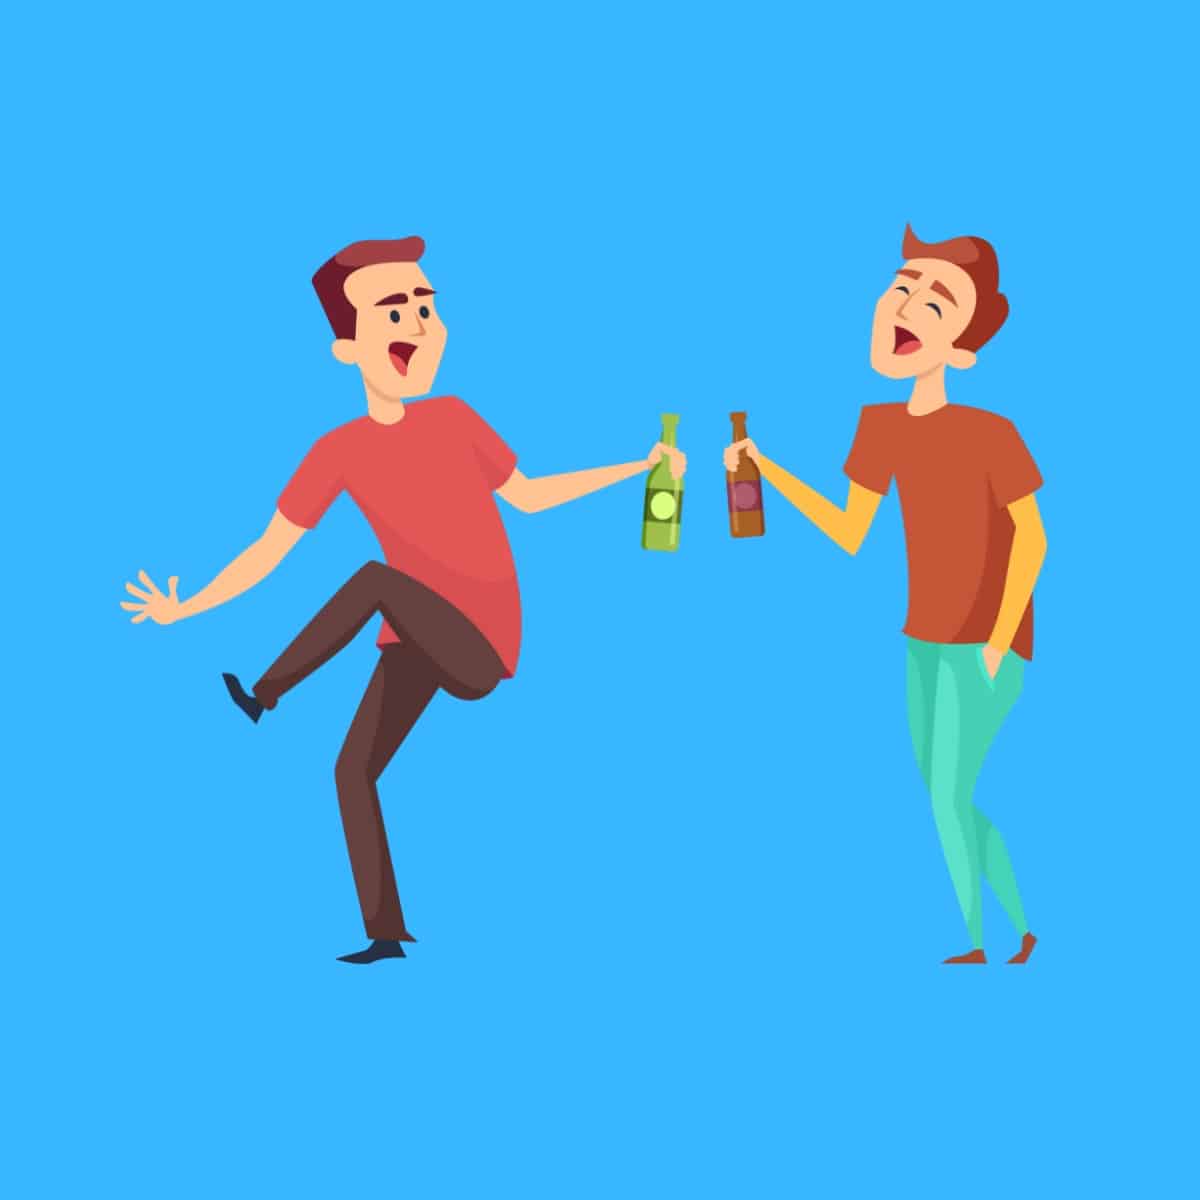 Cartoon graphic of two friends drinking alcohol and laughing on a blue background.